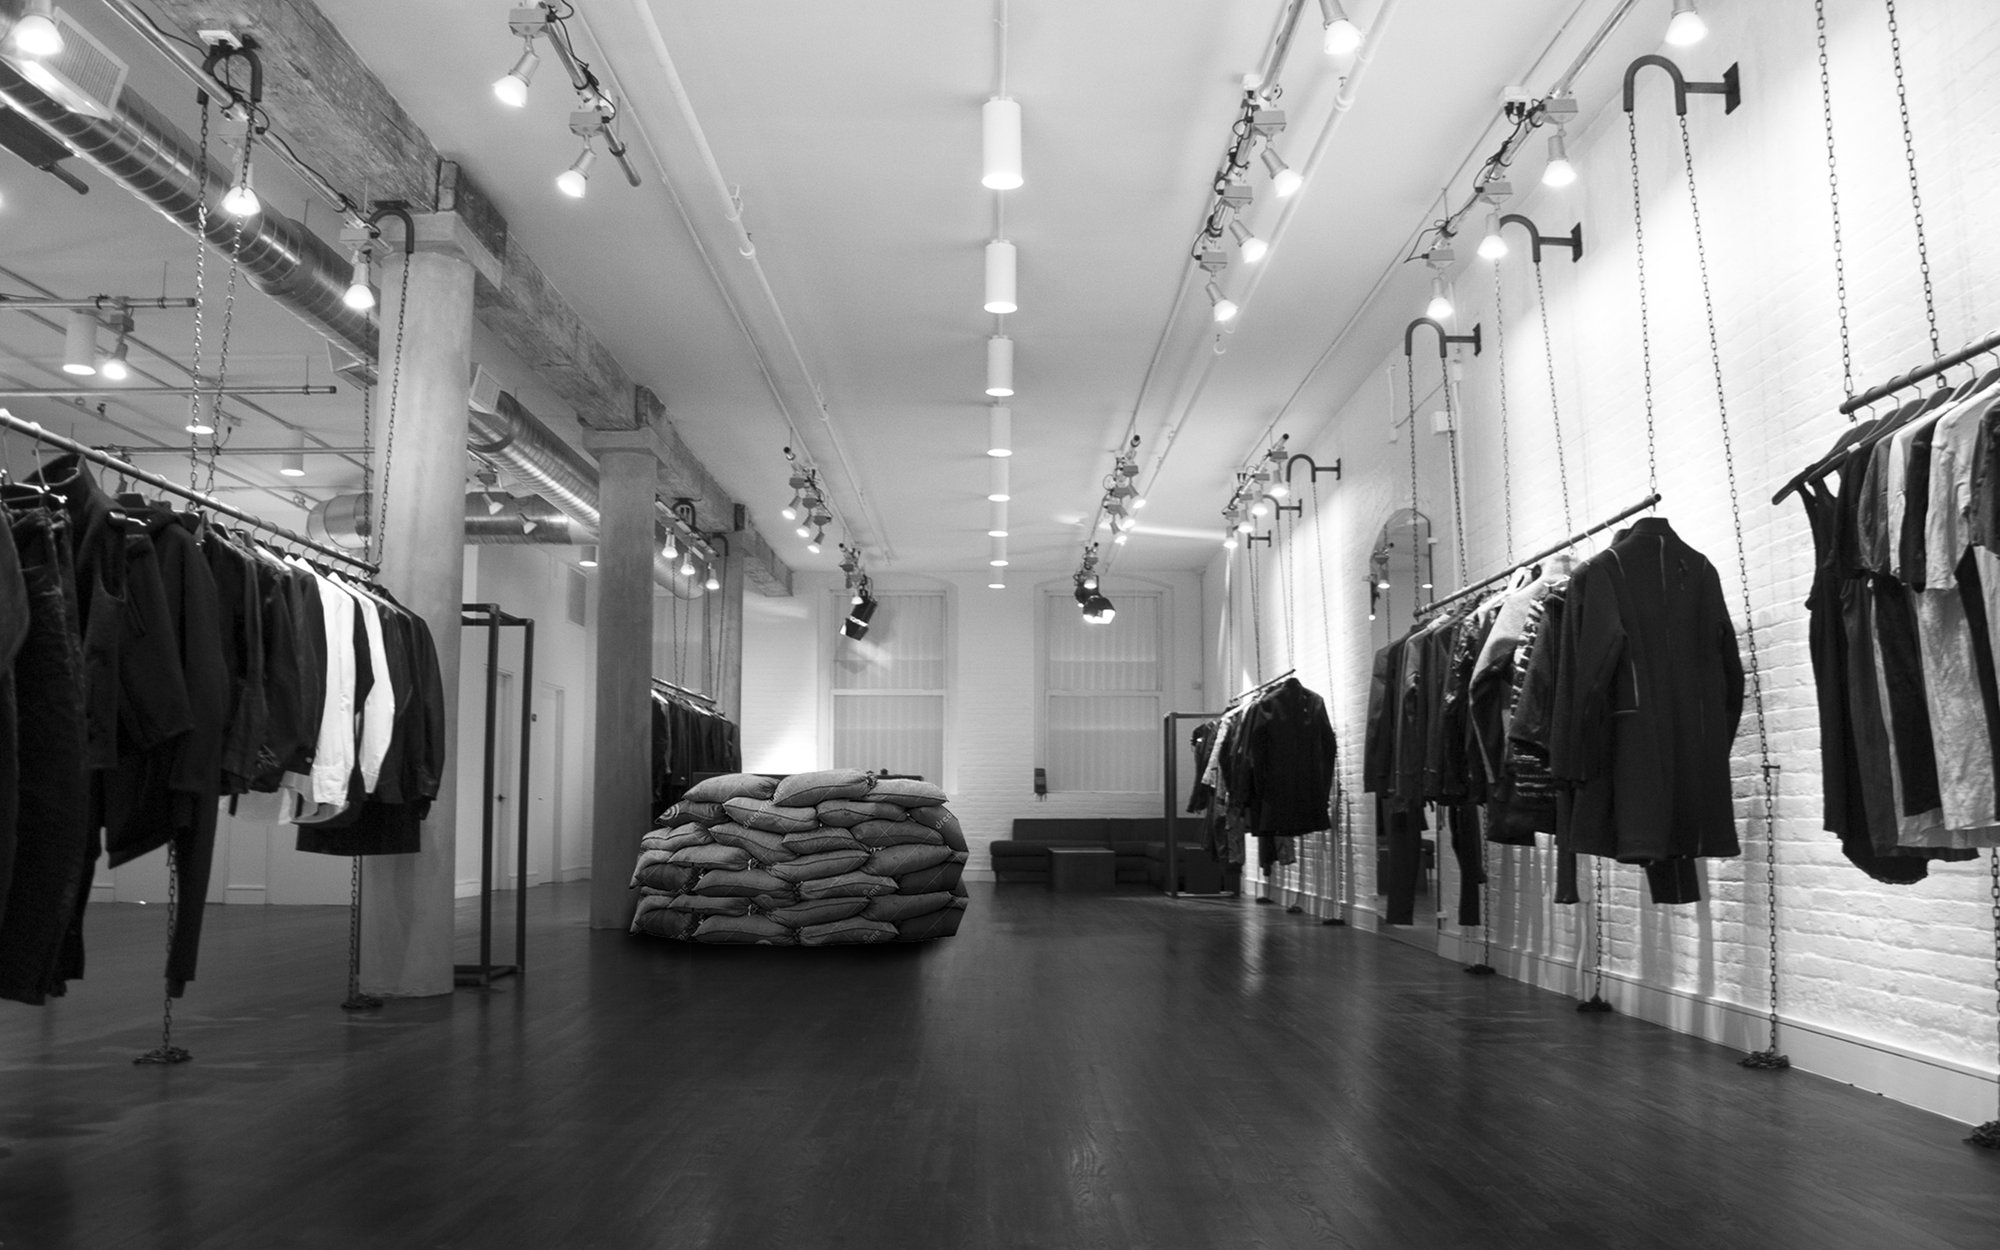 The concept: Turn the Store into a war-zone using sandbags.